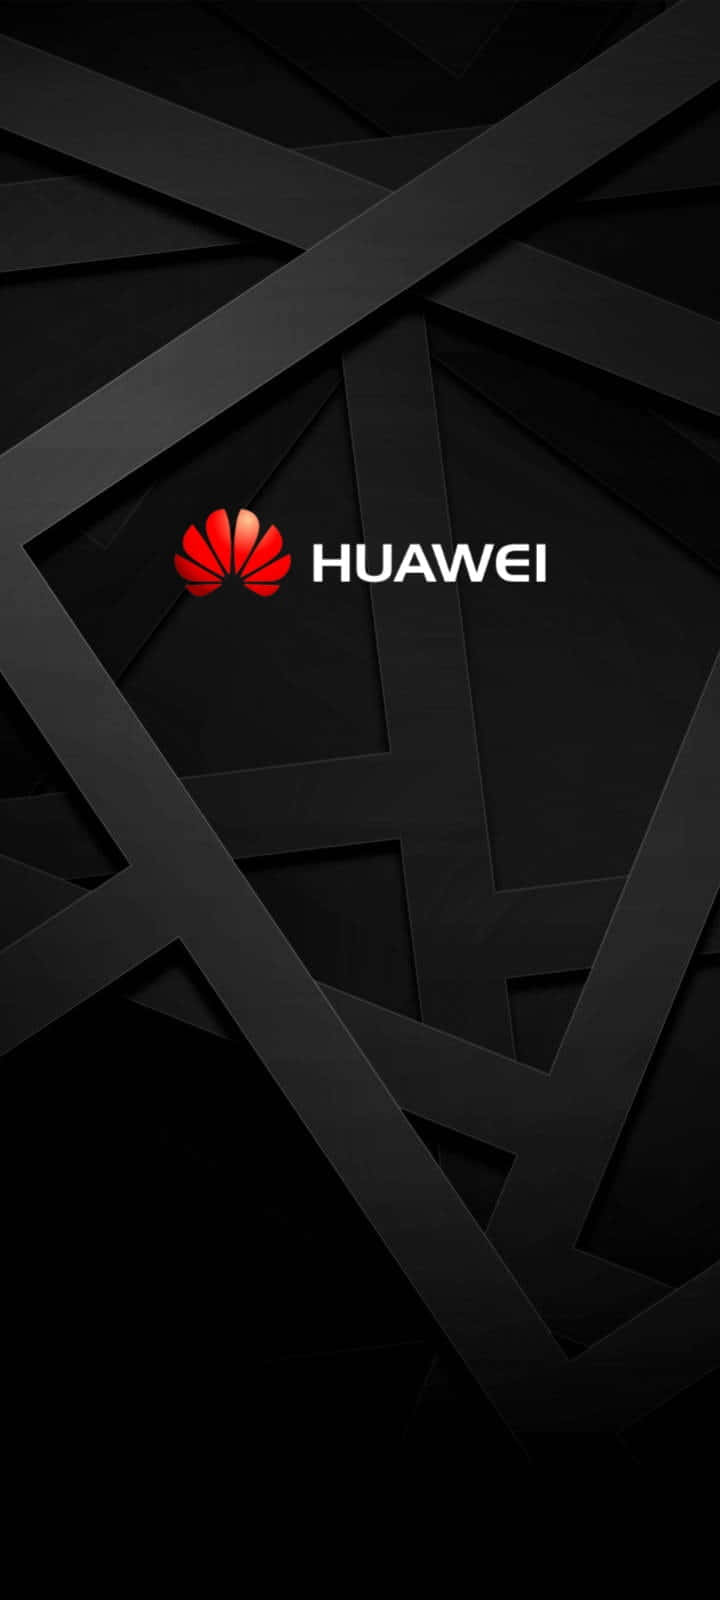 Experience the Power of the New Huawei